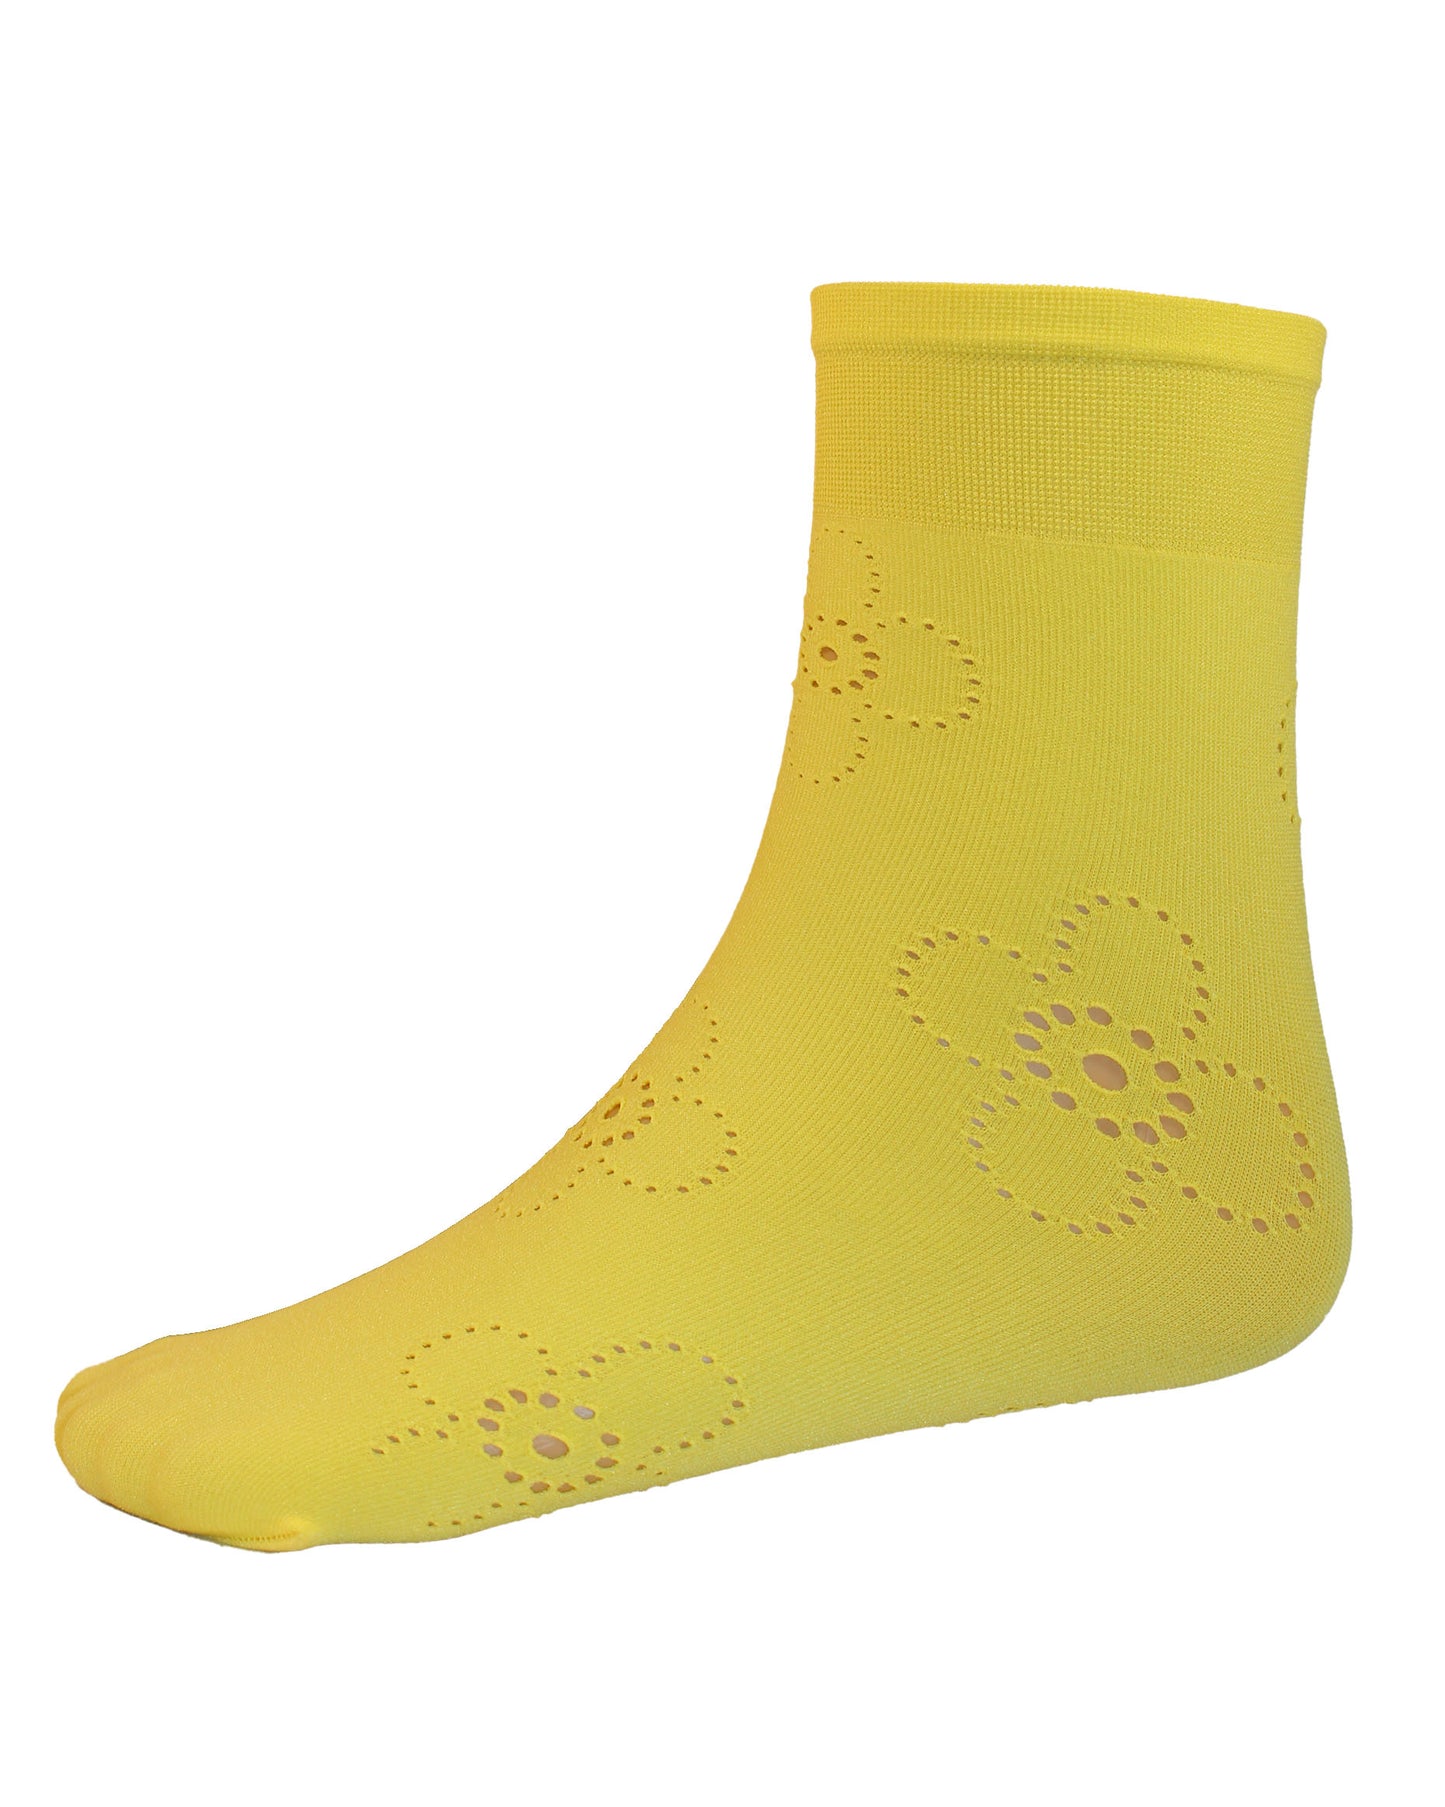 Omsa Flore Calzino - Kid's bright yellow opaque children's fashion ankle socks with a perforated cut out floral style pattern and deep elasticated comfort cuff.